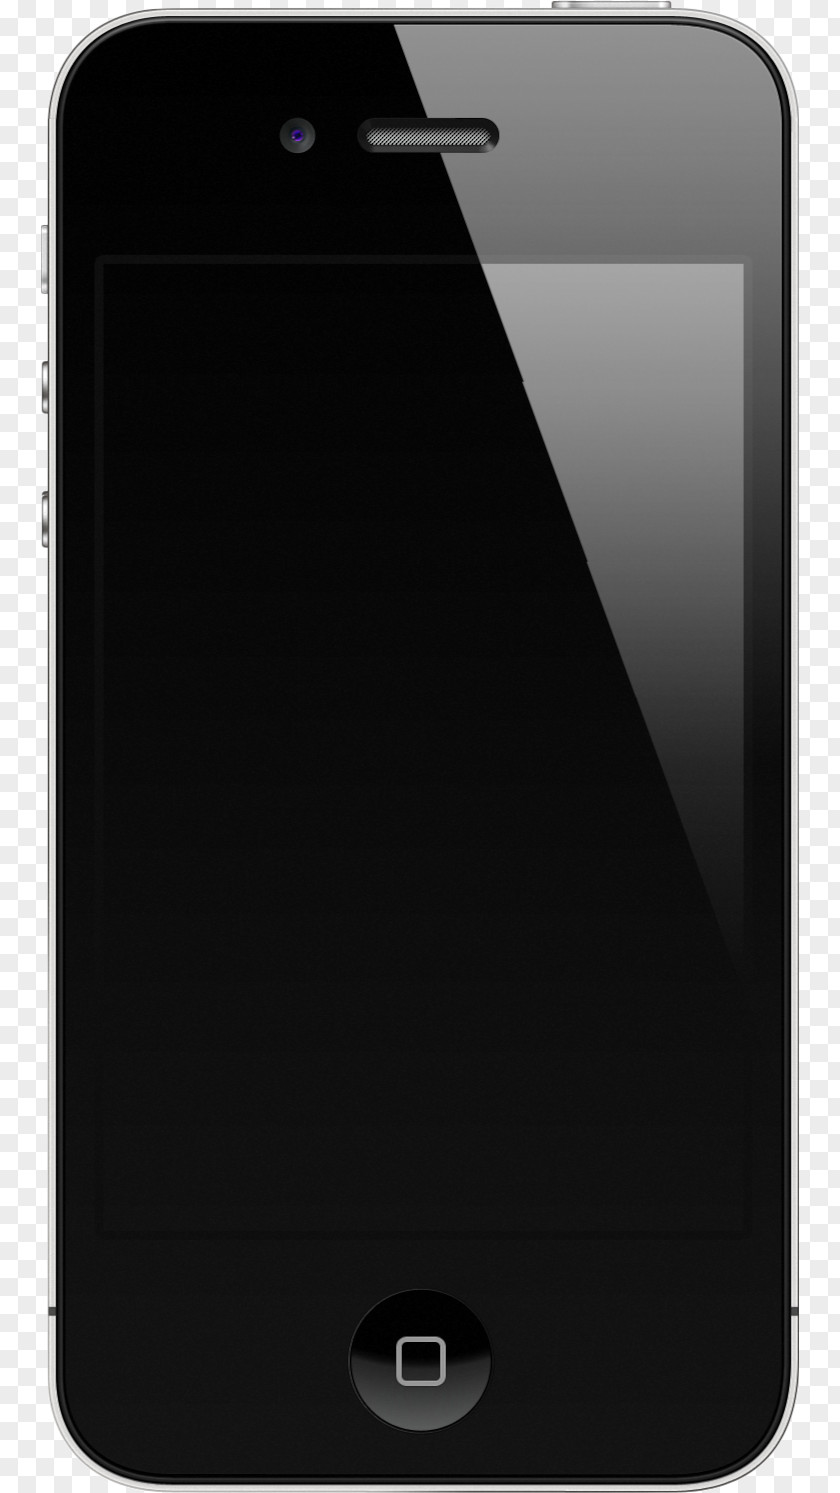 Apple Iphone IPhone 4S 5 3GS PNG